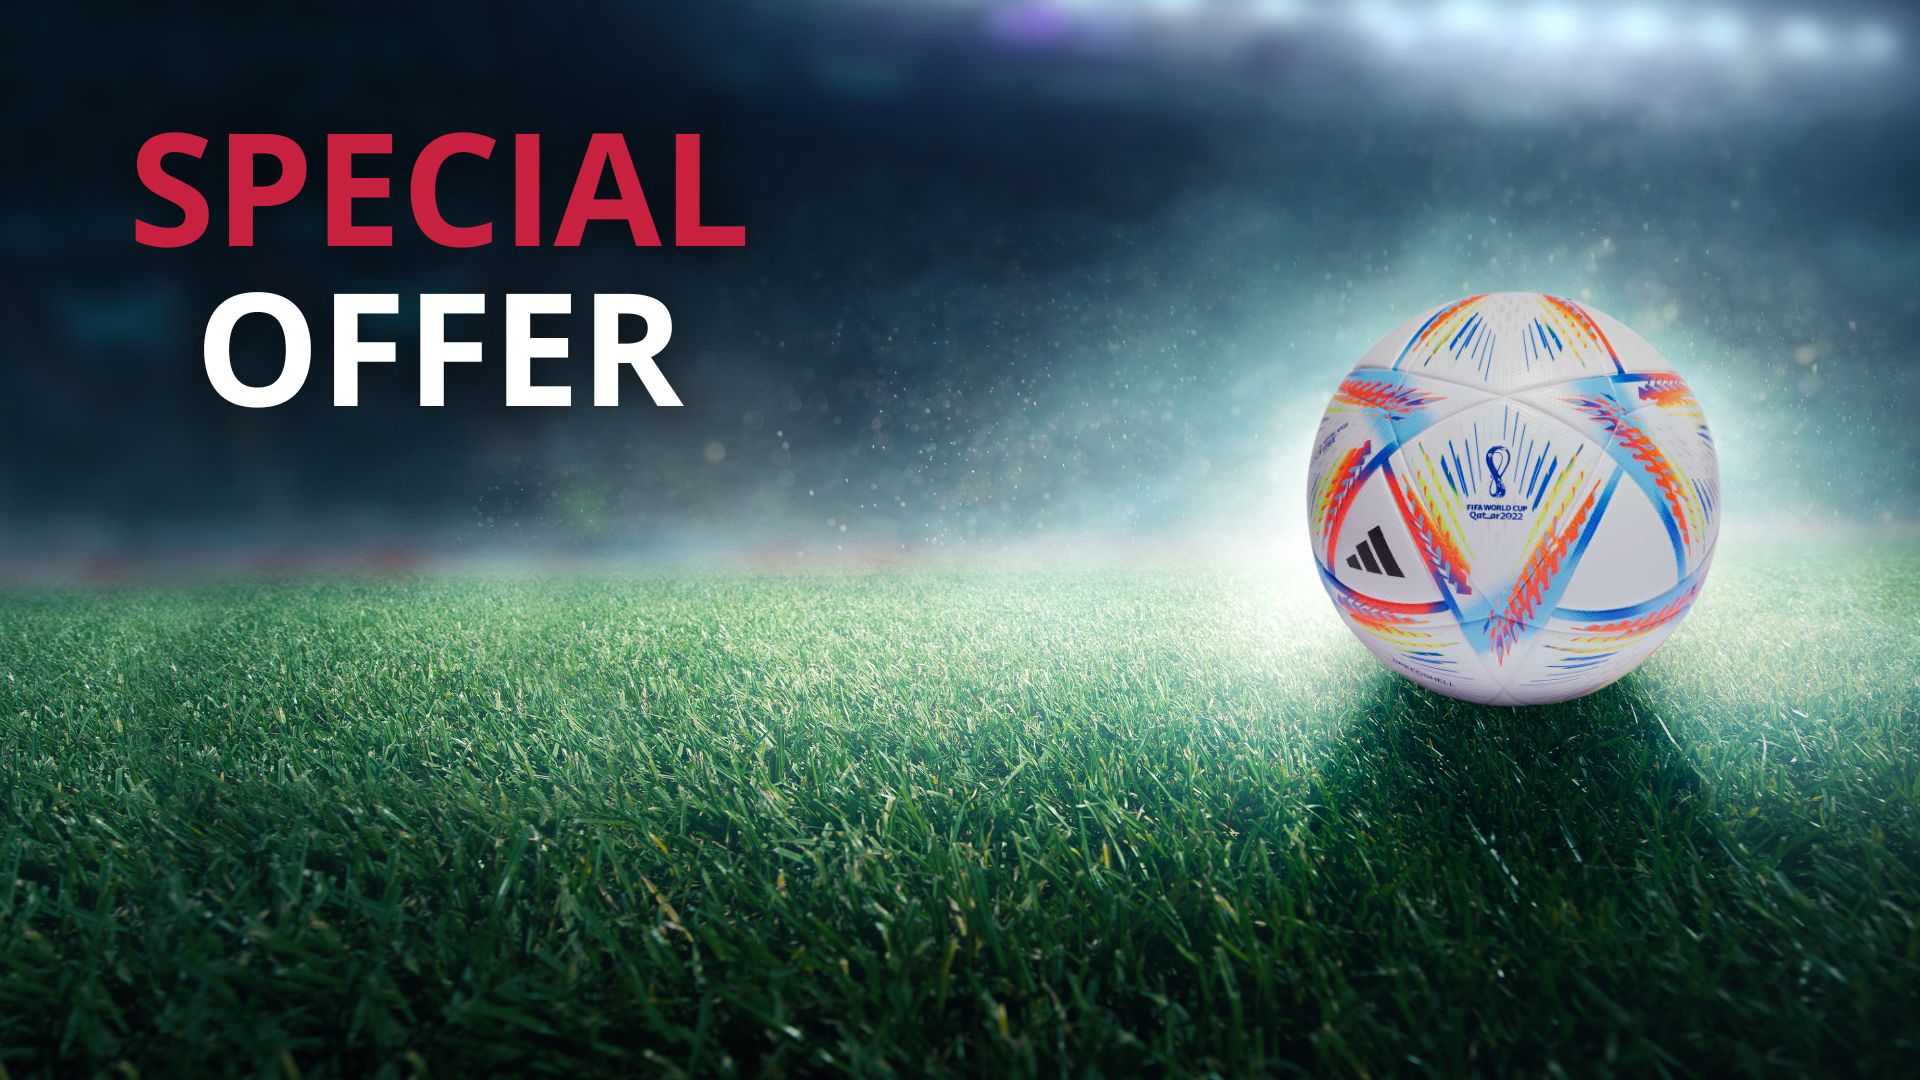 November Special Offer: FREE Footballs on all Dura Pump Orders Over £2,500